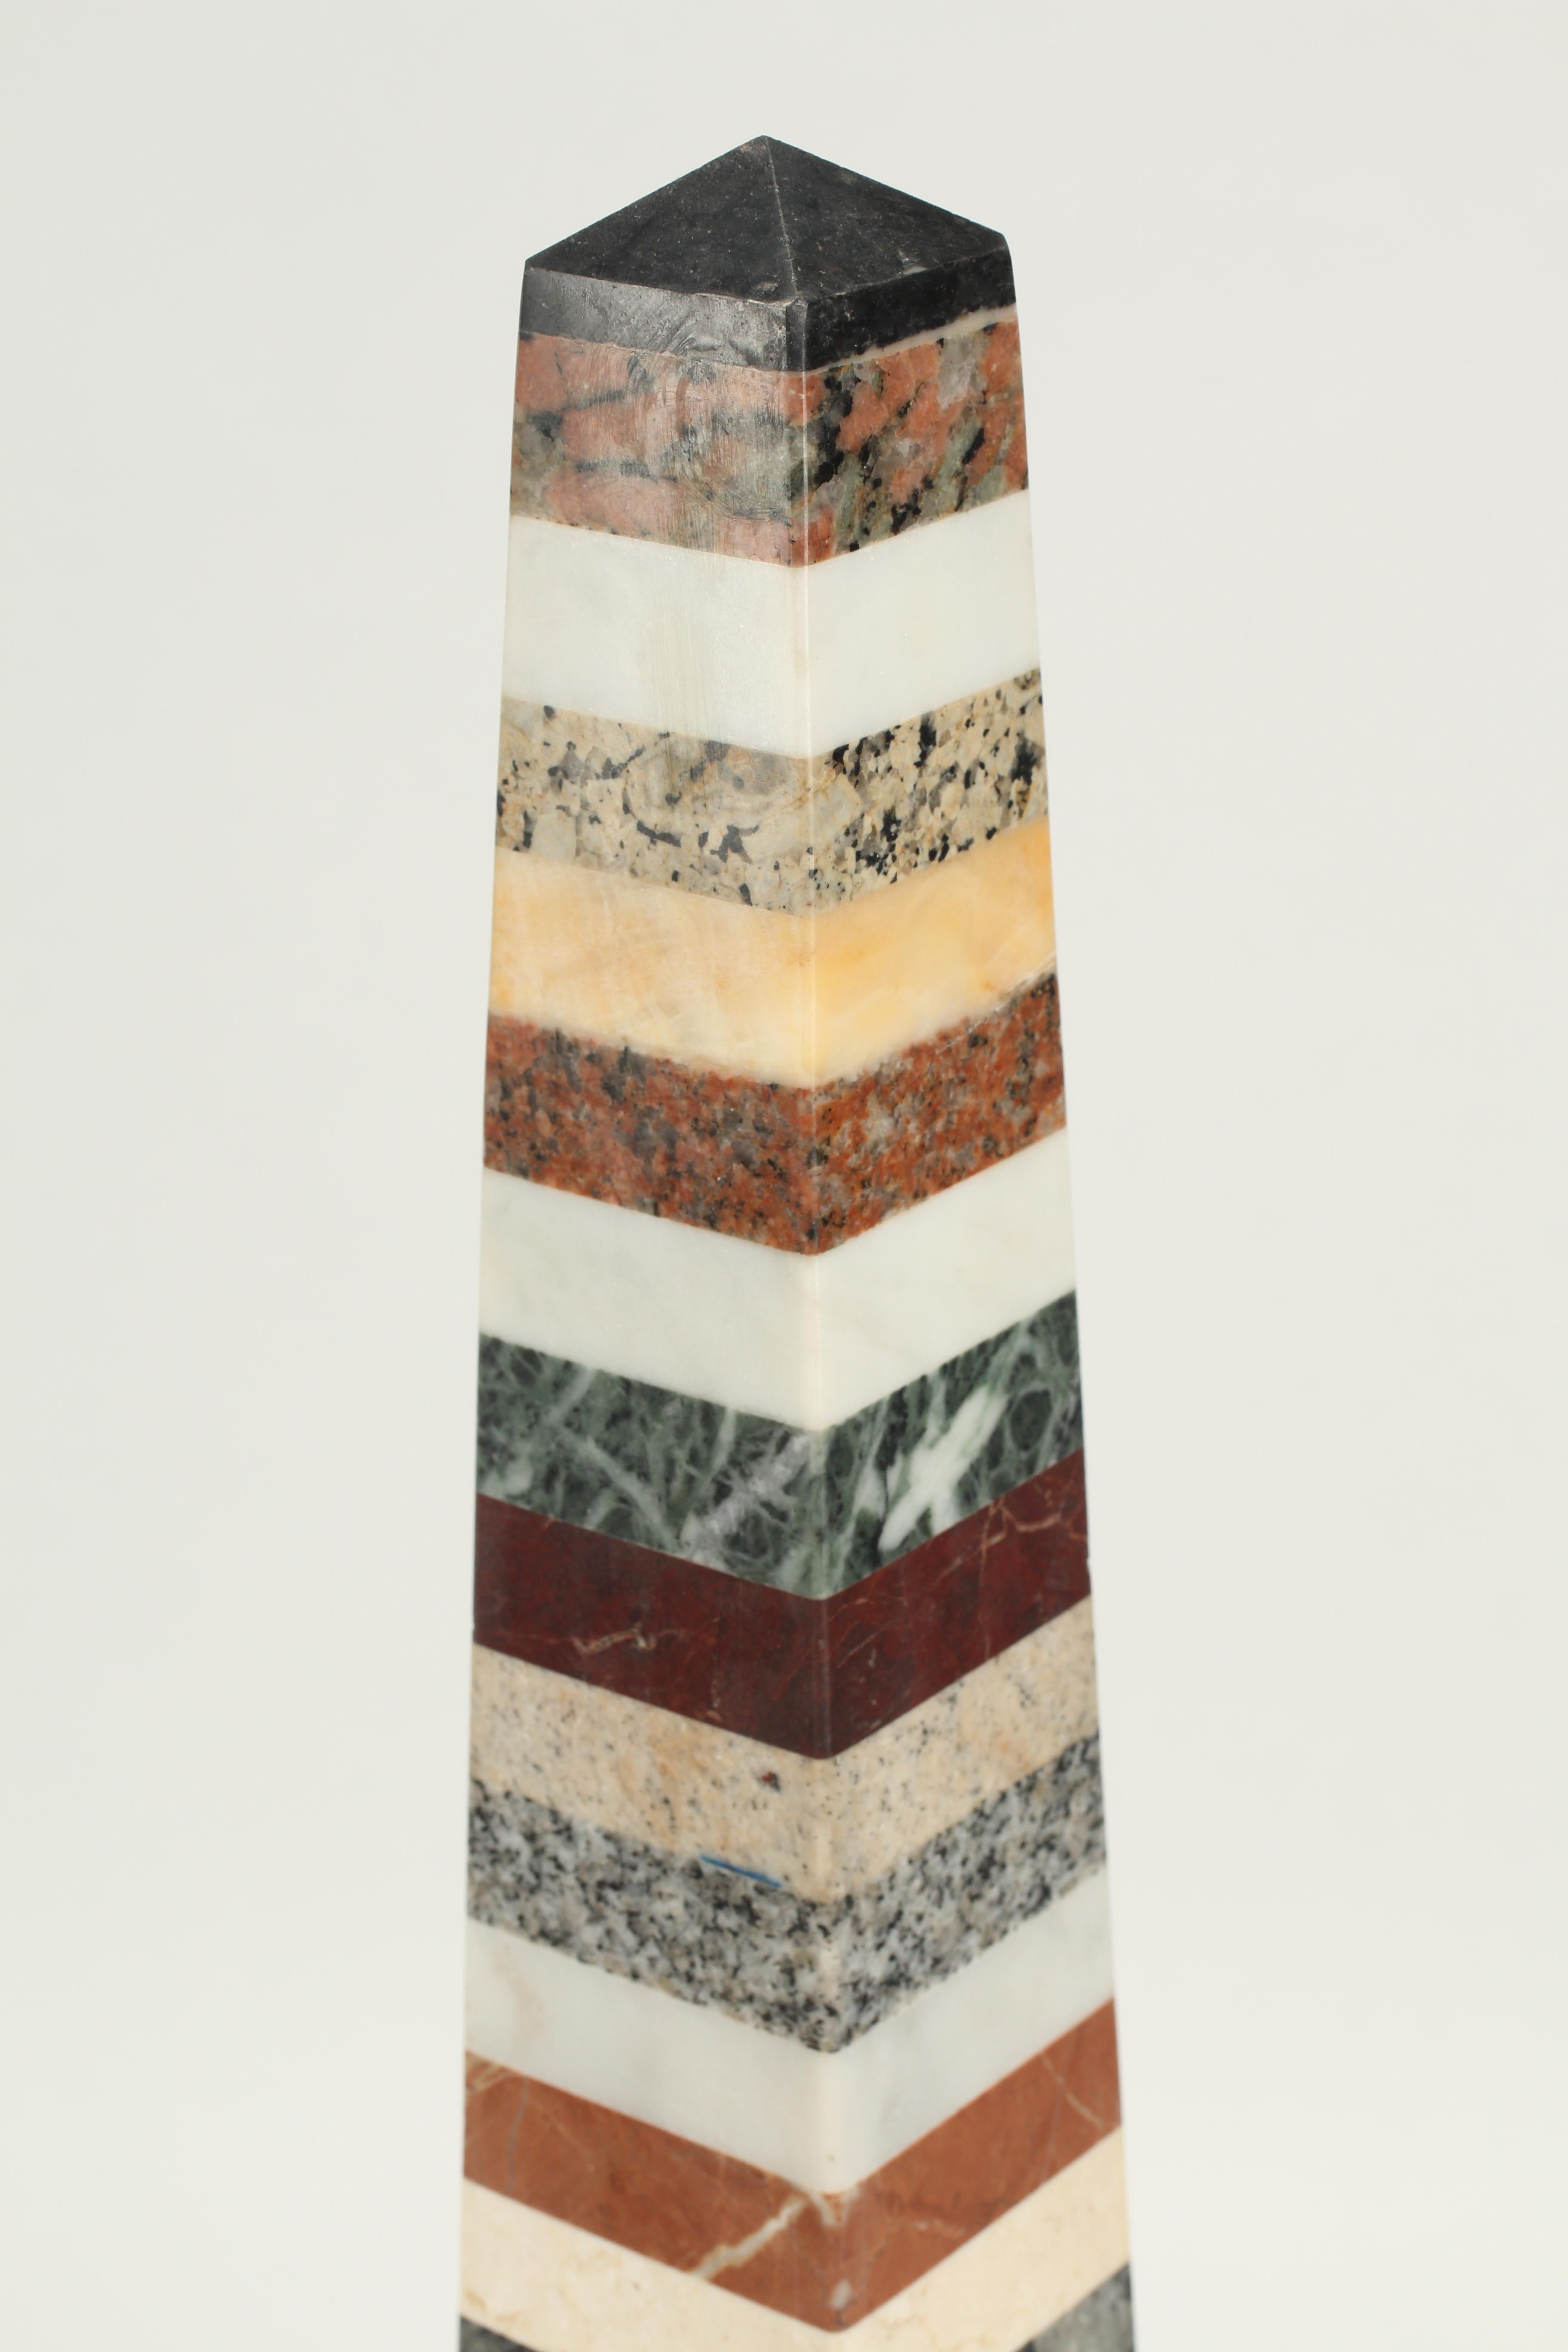 A superb pair of specimen marble obelisks constructed from a variety of specimen marbles. The highly decorative and large scale pair complements traditional and contemporary interiors.